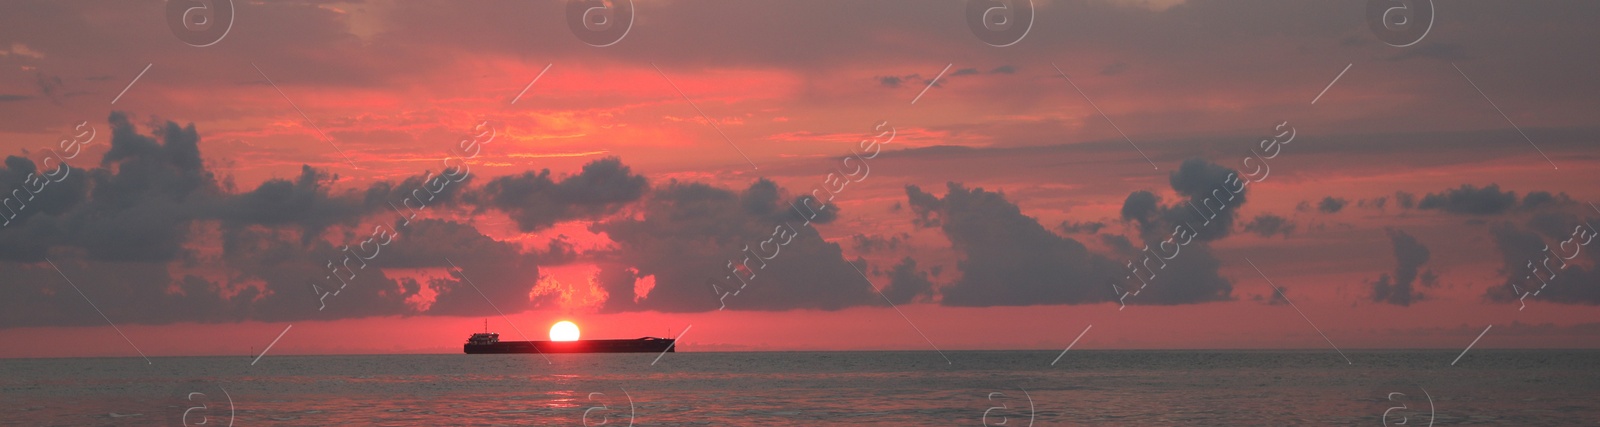 Image of Beautiful sky with sun over sea at sunset, banner design. Ship sailing at sunset